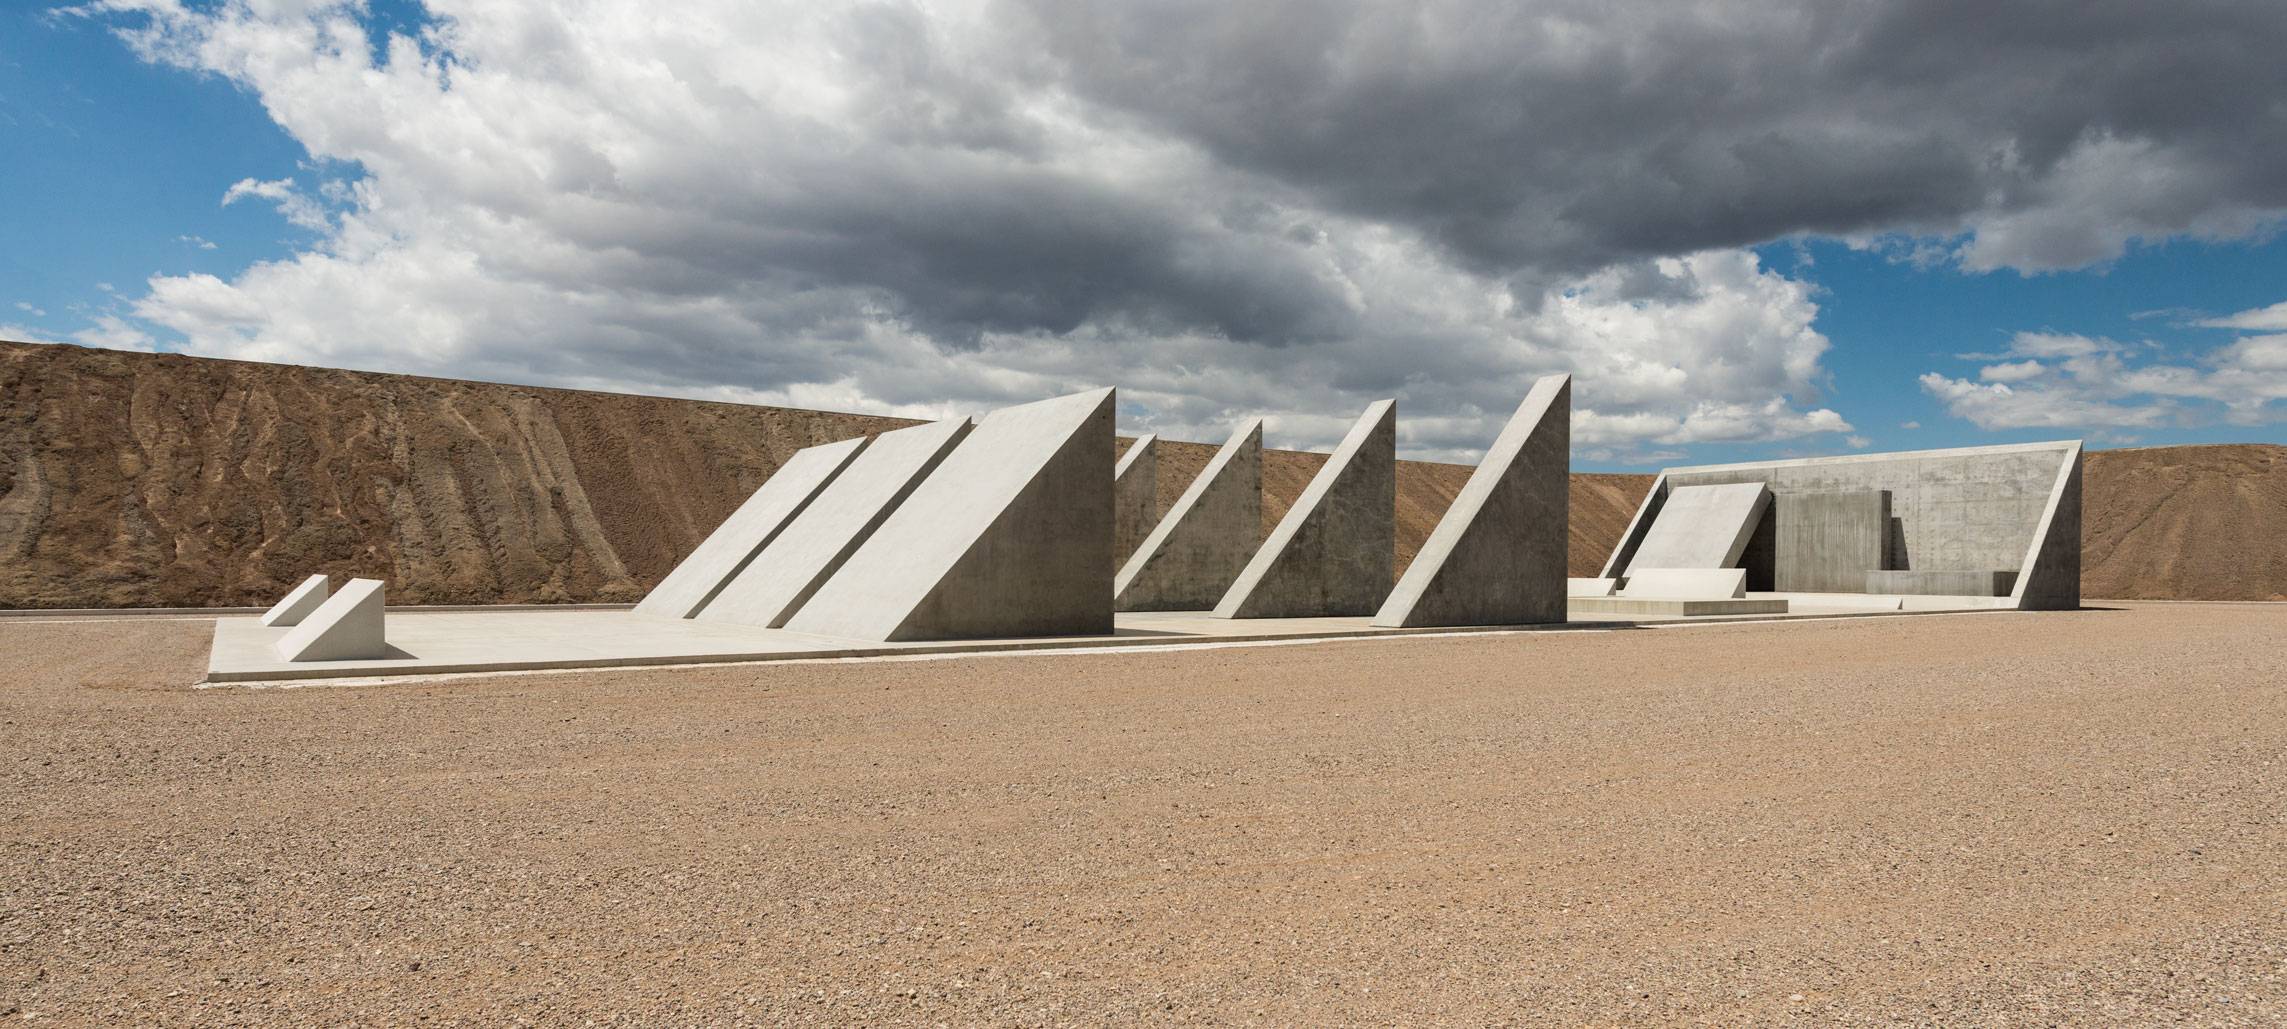 45°, 90°, 180°, City © Michael Heizer. Courtesy of Triple Aught Foundation. Photo: Ben Blackwell